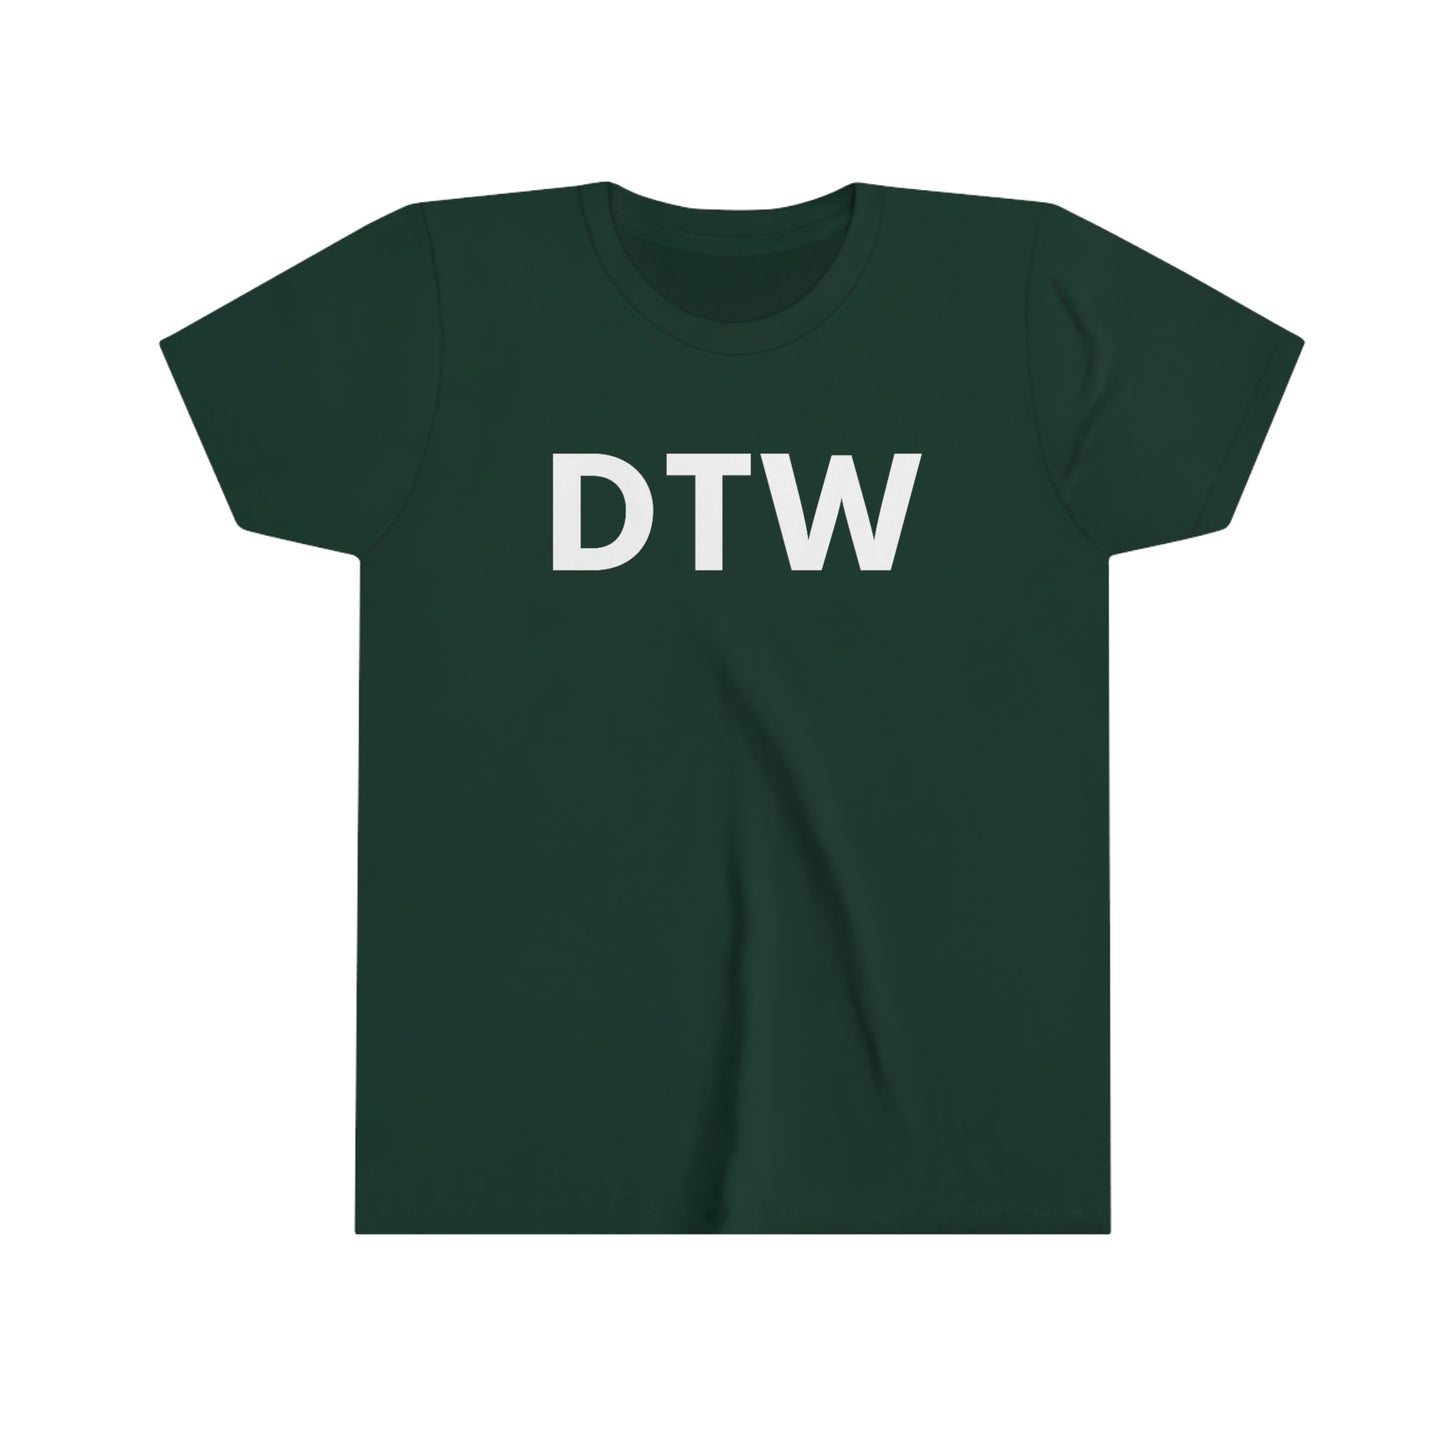 Detroit 'DTW' T-Shirt | Youth Short Sleeve